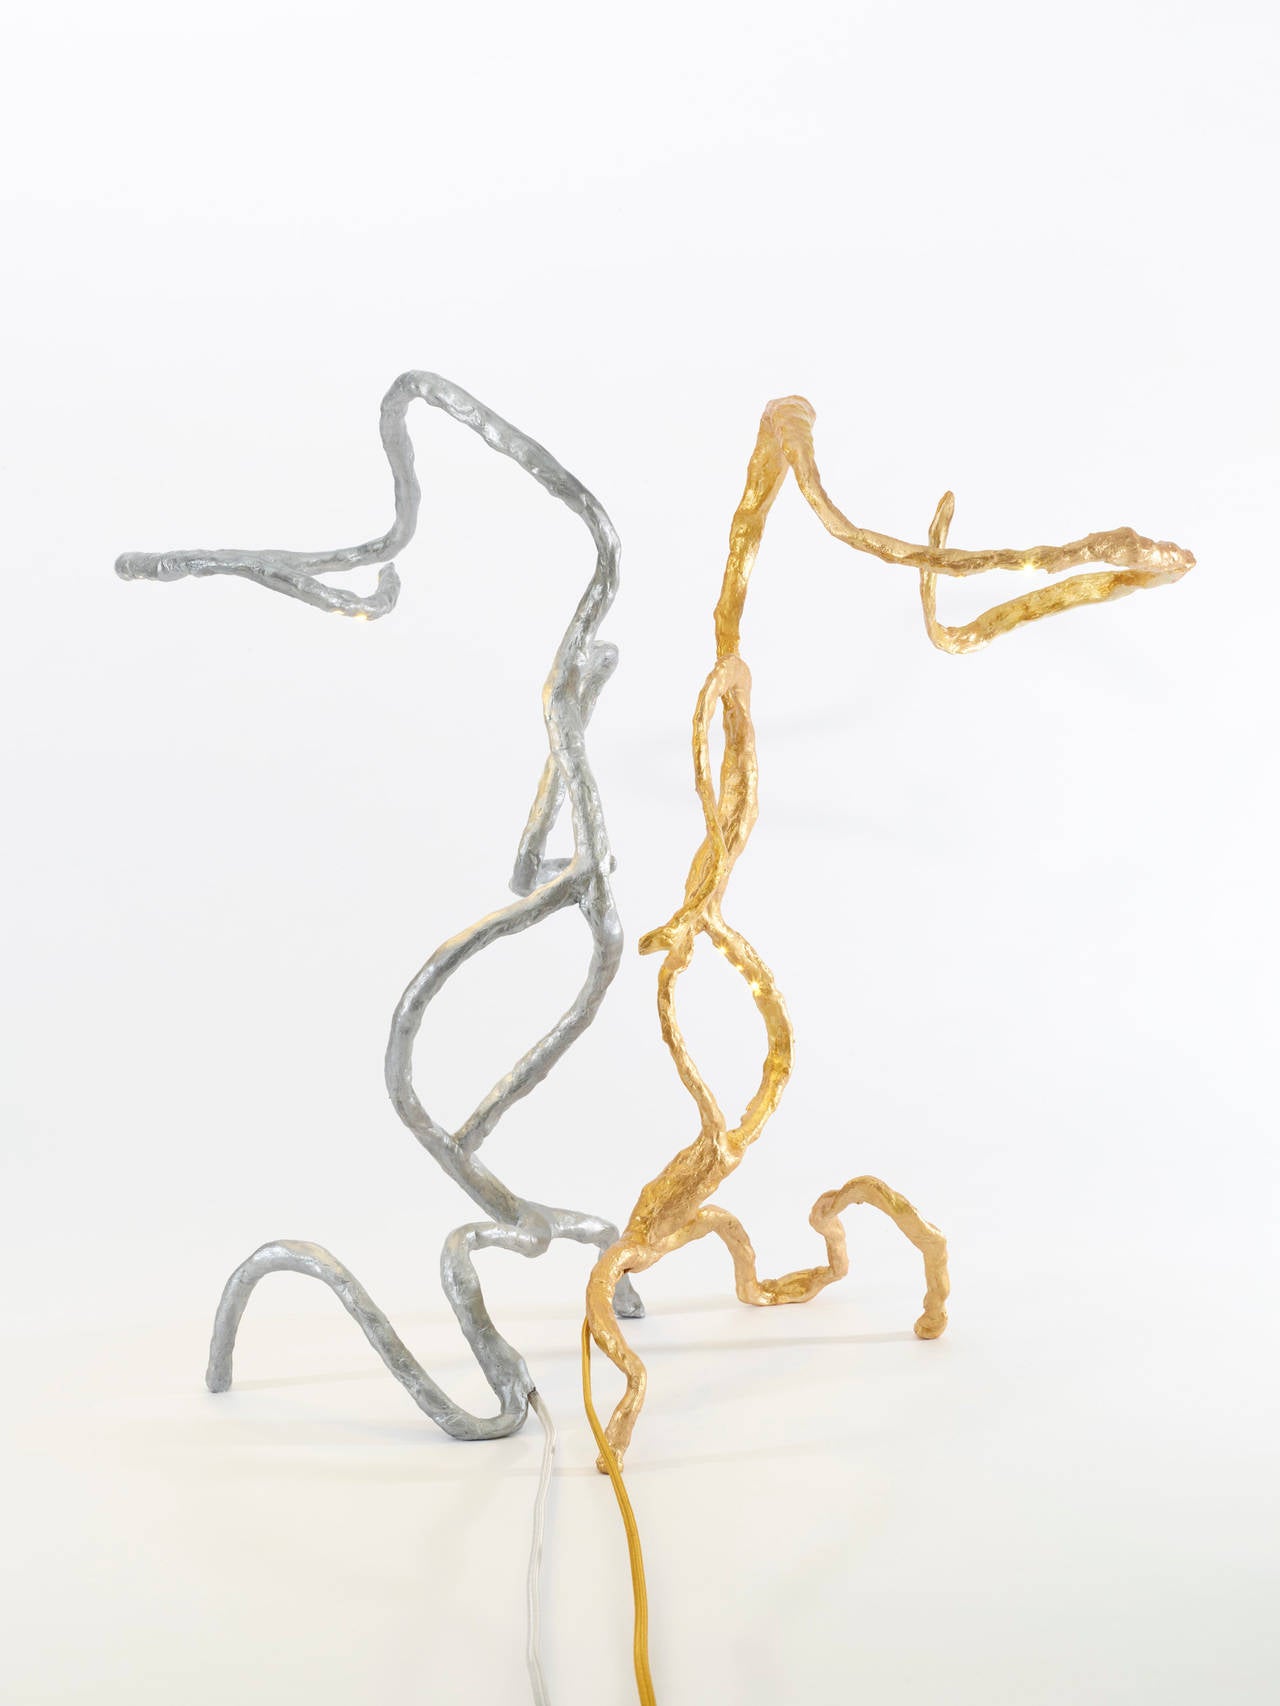 With You (Silver) and Not With You (Gold) - Sculpture by Marcia Grostien